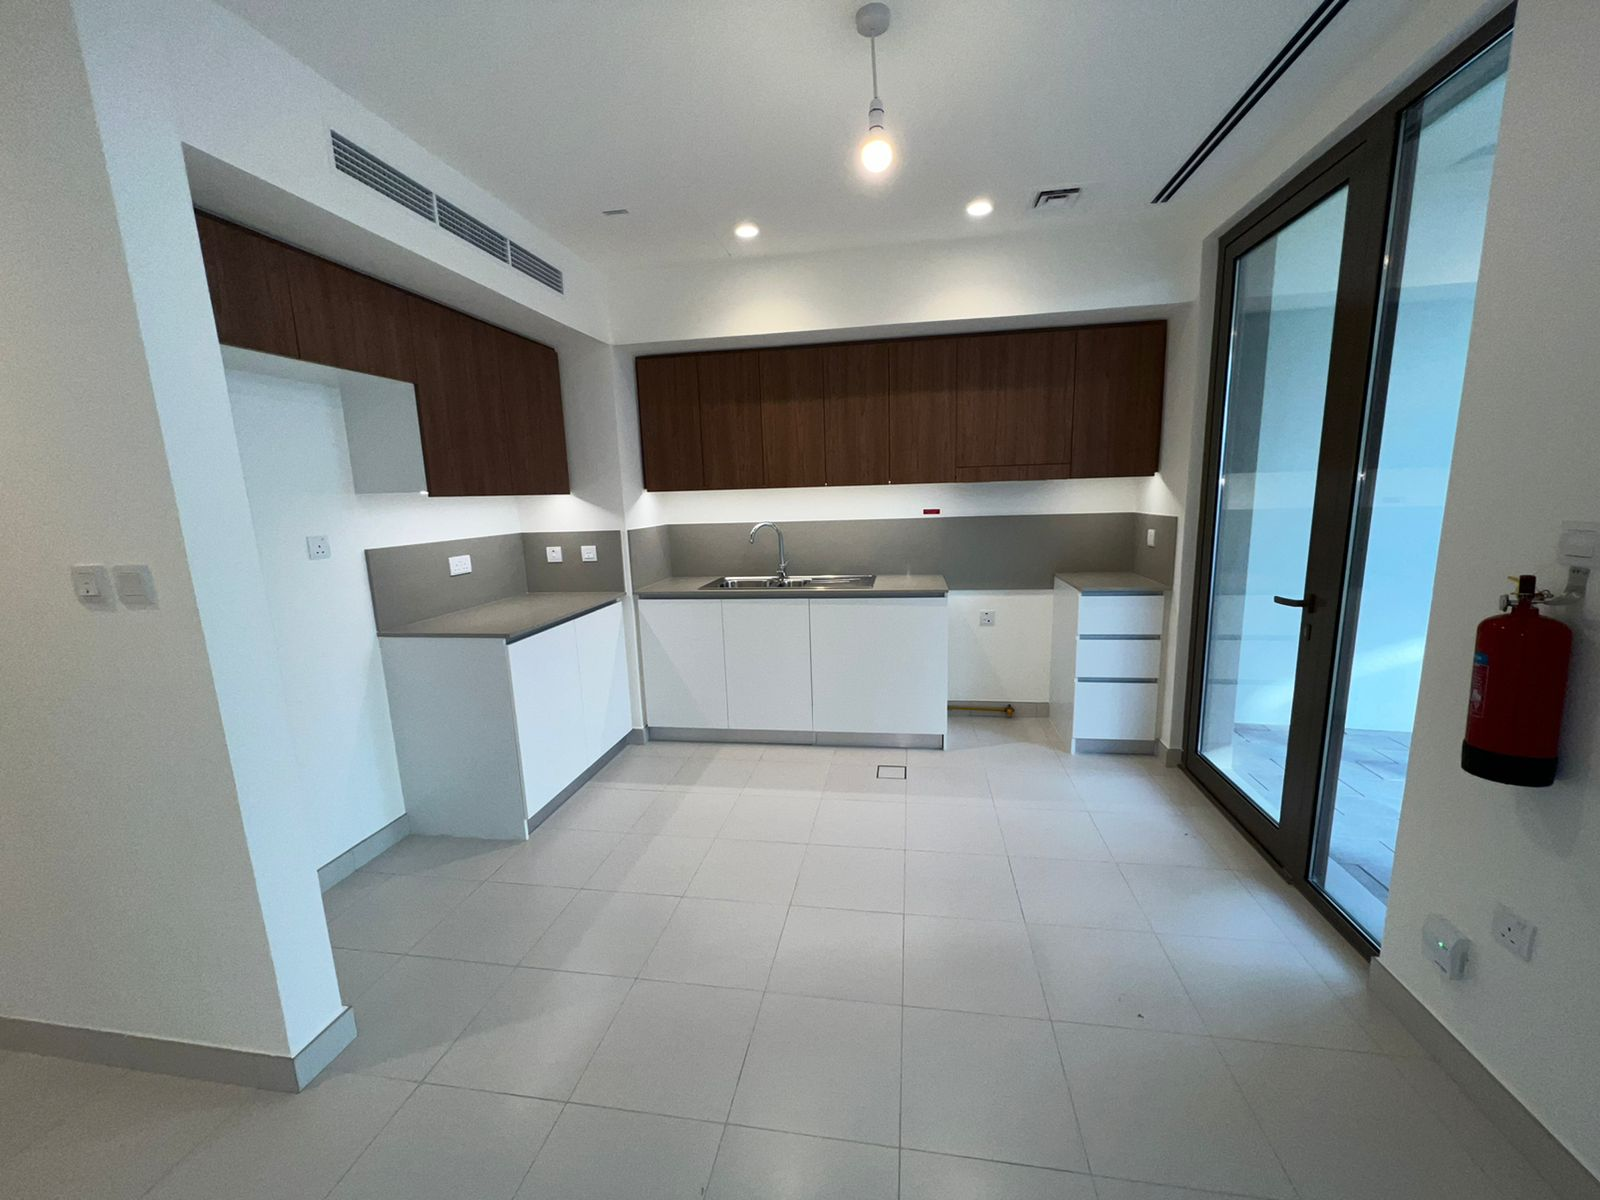 Exclusive 5BR Townhouse with good amenities for sale at Malta